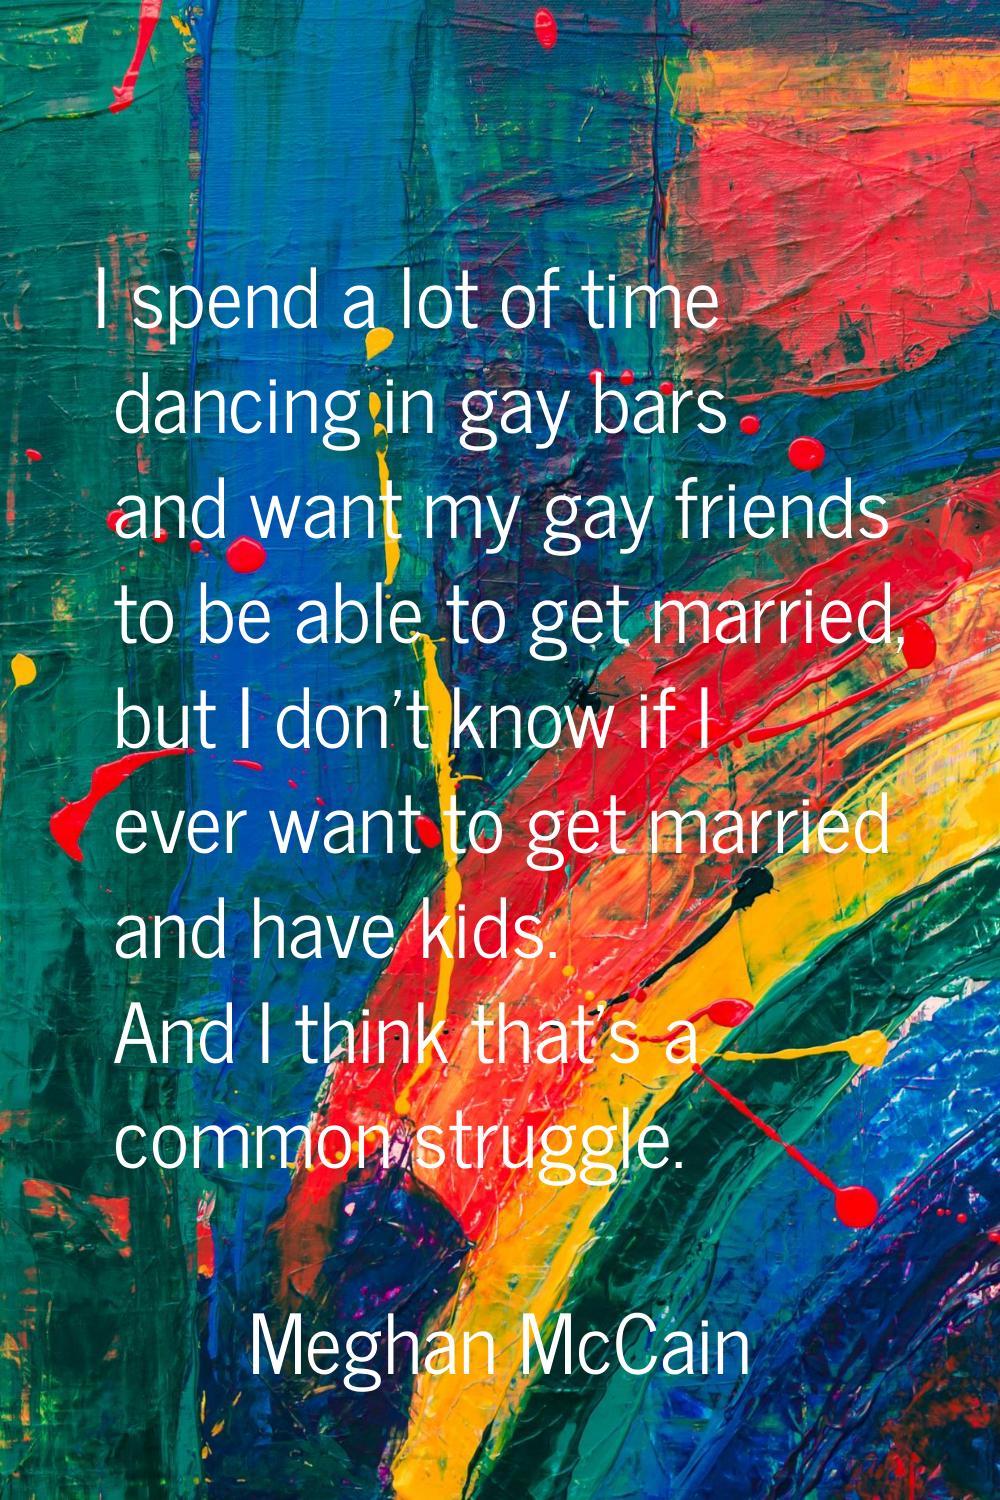 I spend a lot of time dancing in gay bars and want my gay friends to be able to get married, but I 